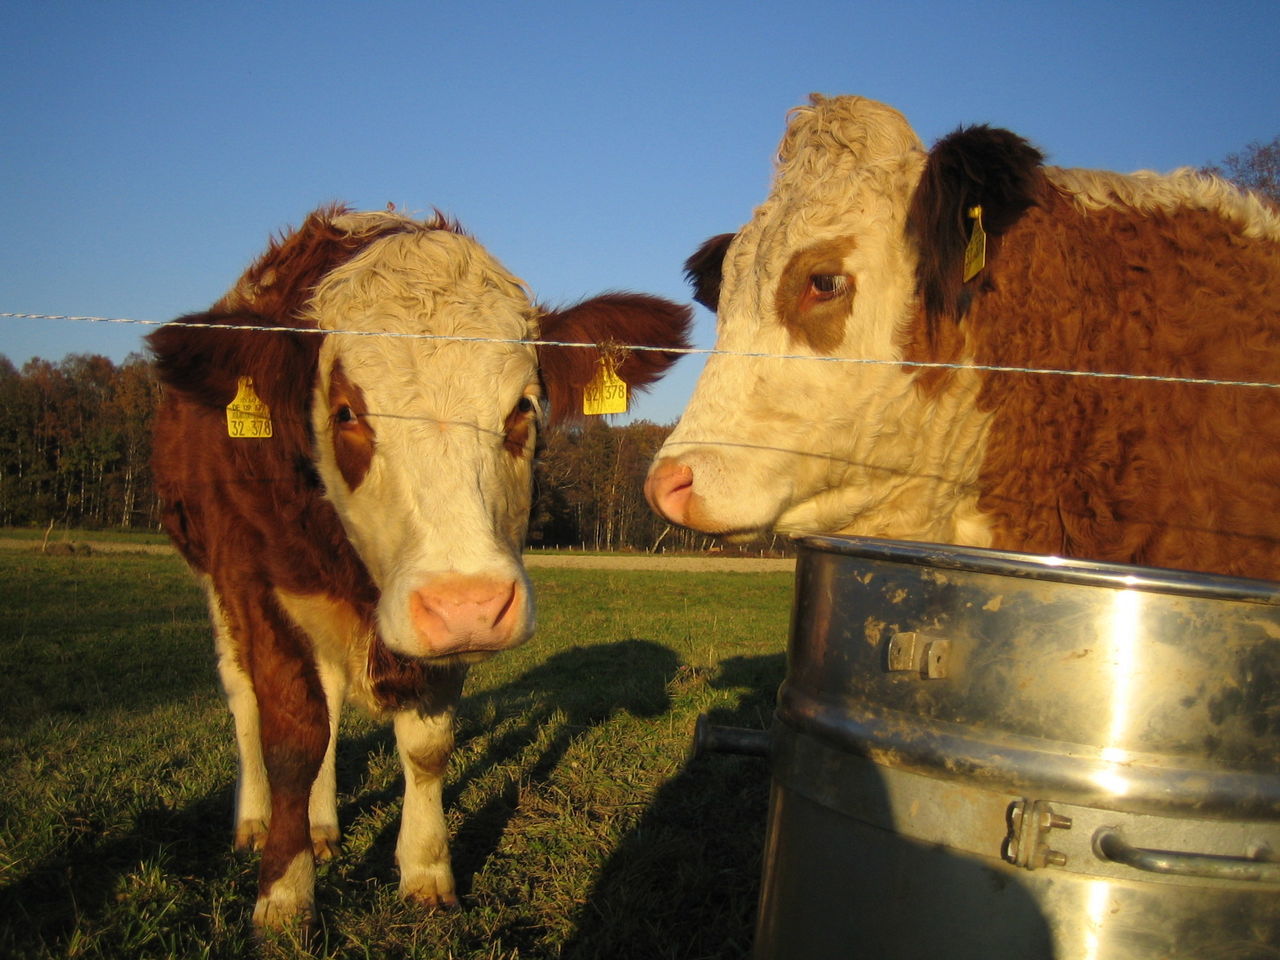 Cows standing by container on field